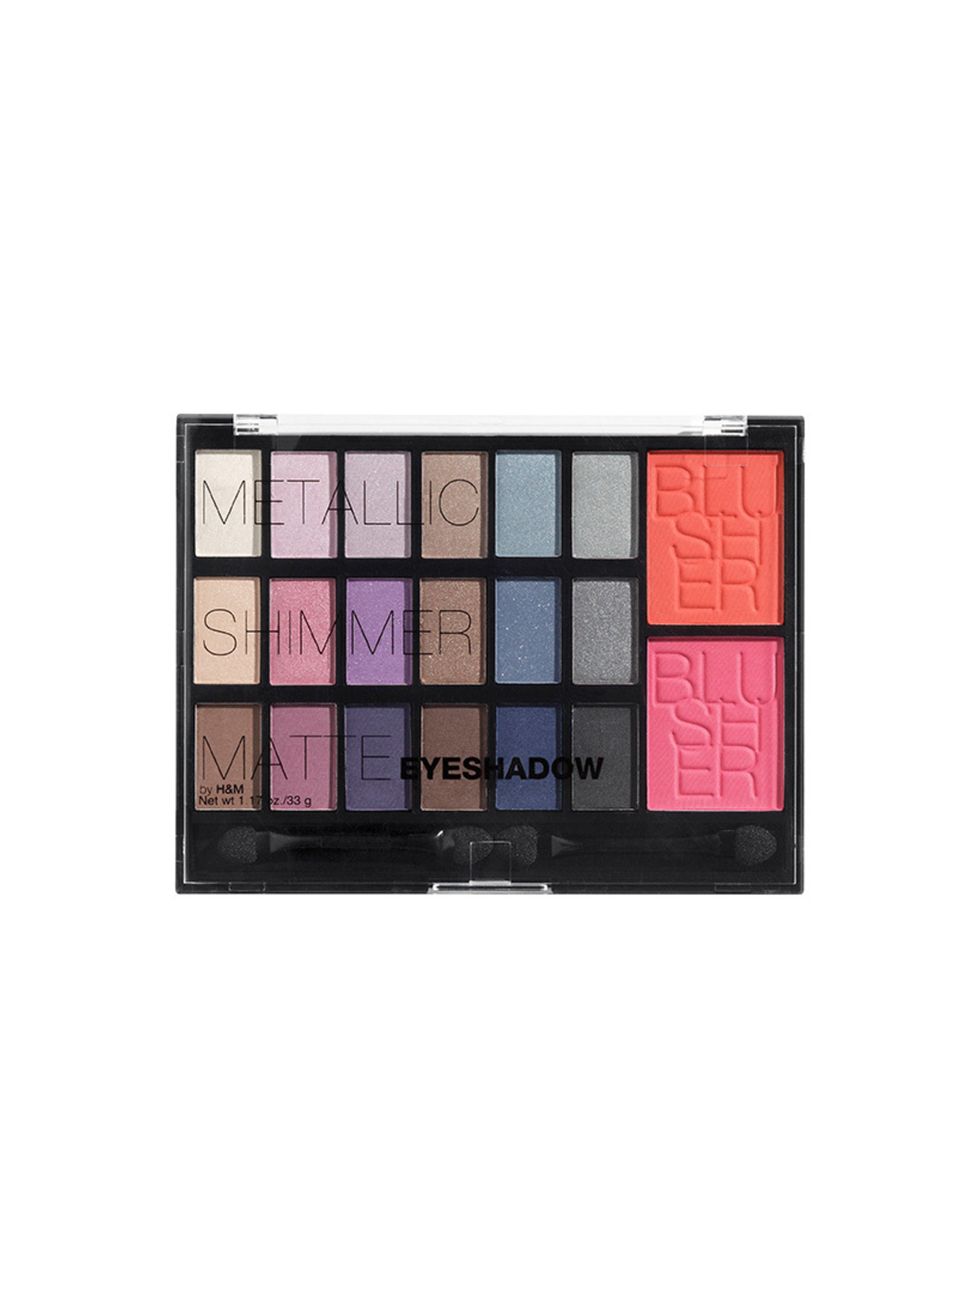 <p><strong><a href="http://www.hm.com/gb/product/19344?article=19344-A">H & M Eyeshadow and Blusher Palette, £6.99</a></strong></p><p>Box ticking as far as spring trends go. This covers off dual textures (both matte and shimmer are key for this season), a